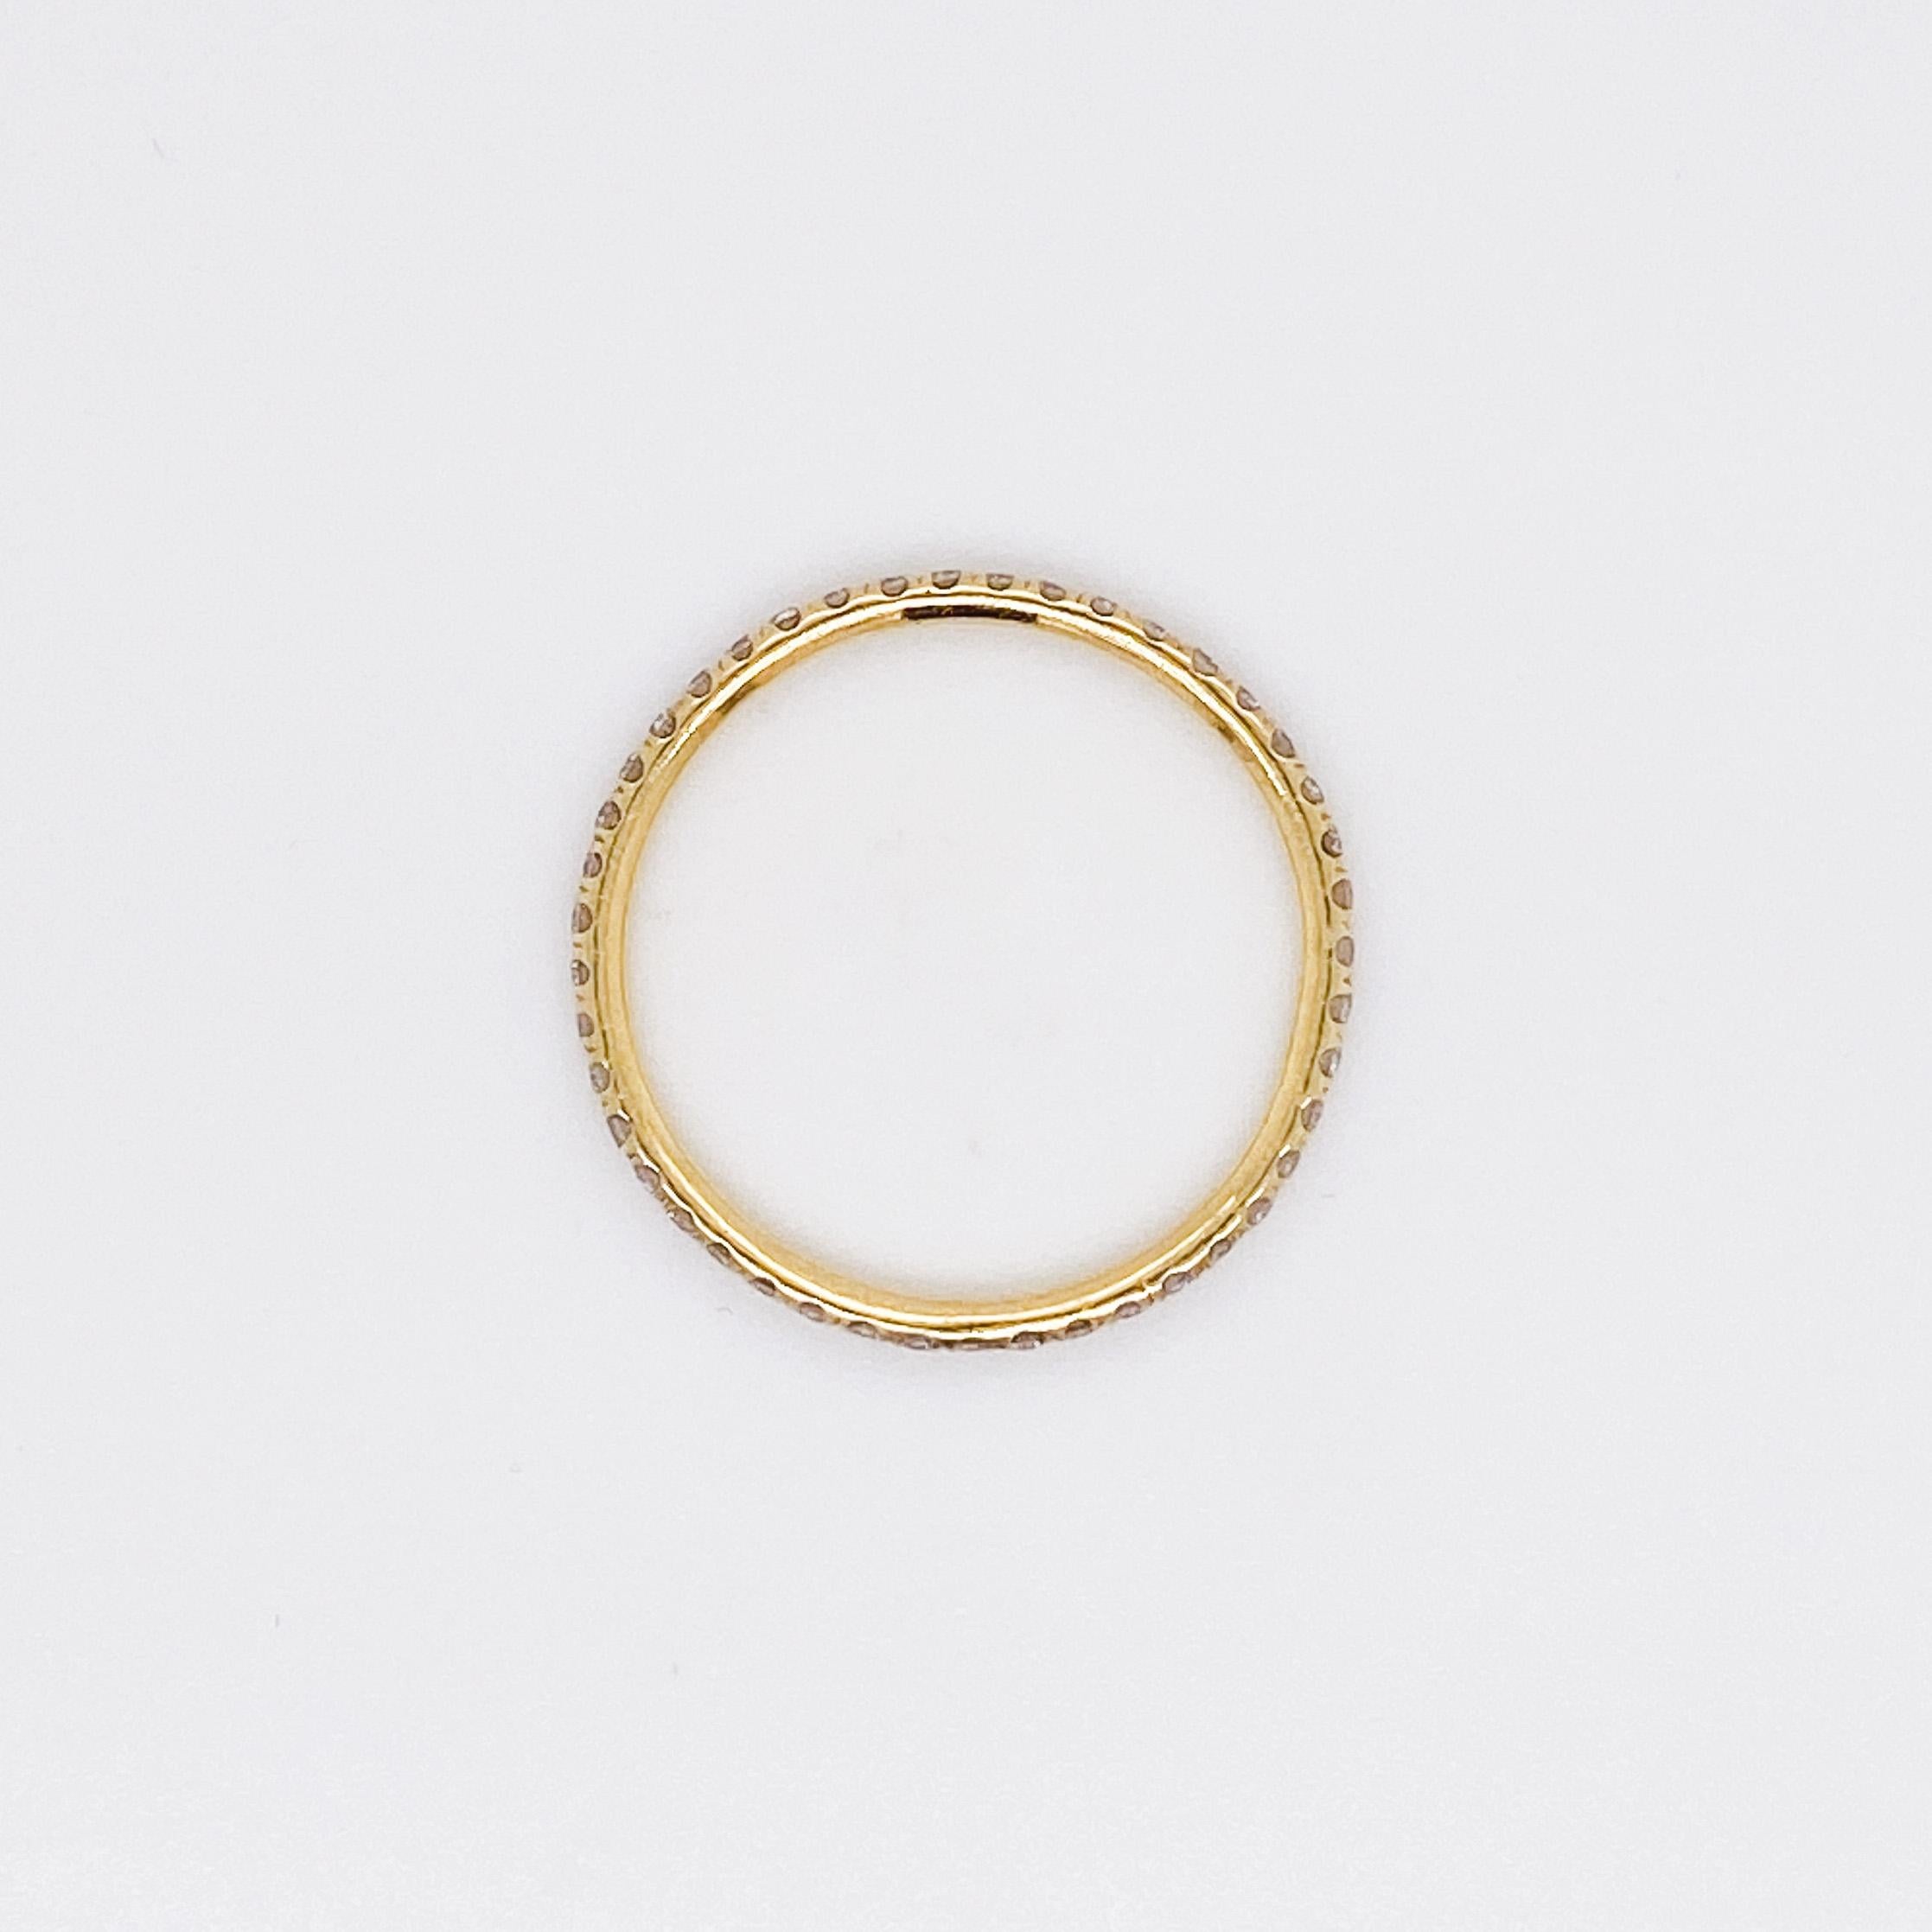 This slender eternity diamond ring is made in classic 18 karat yellow gold. The band is extremely comfortable to wear at only 1.7 mm wide and 1.5 mm in thickness. This is a perfect eternity band for wearing and forgetting you even have it on. If you